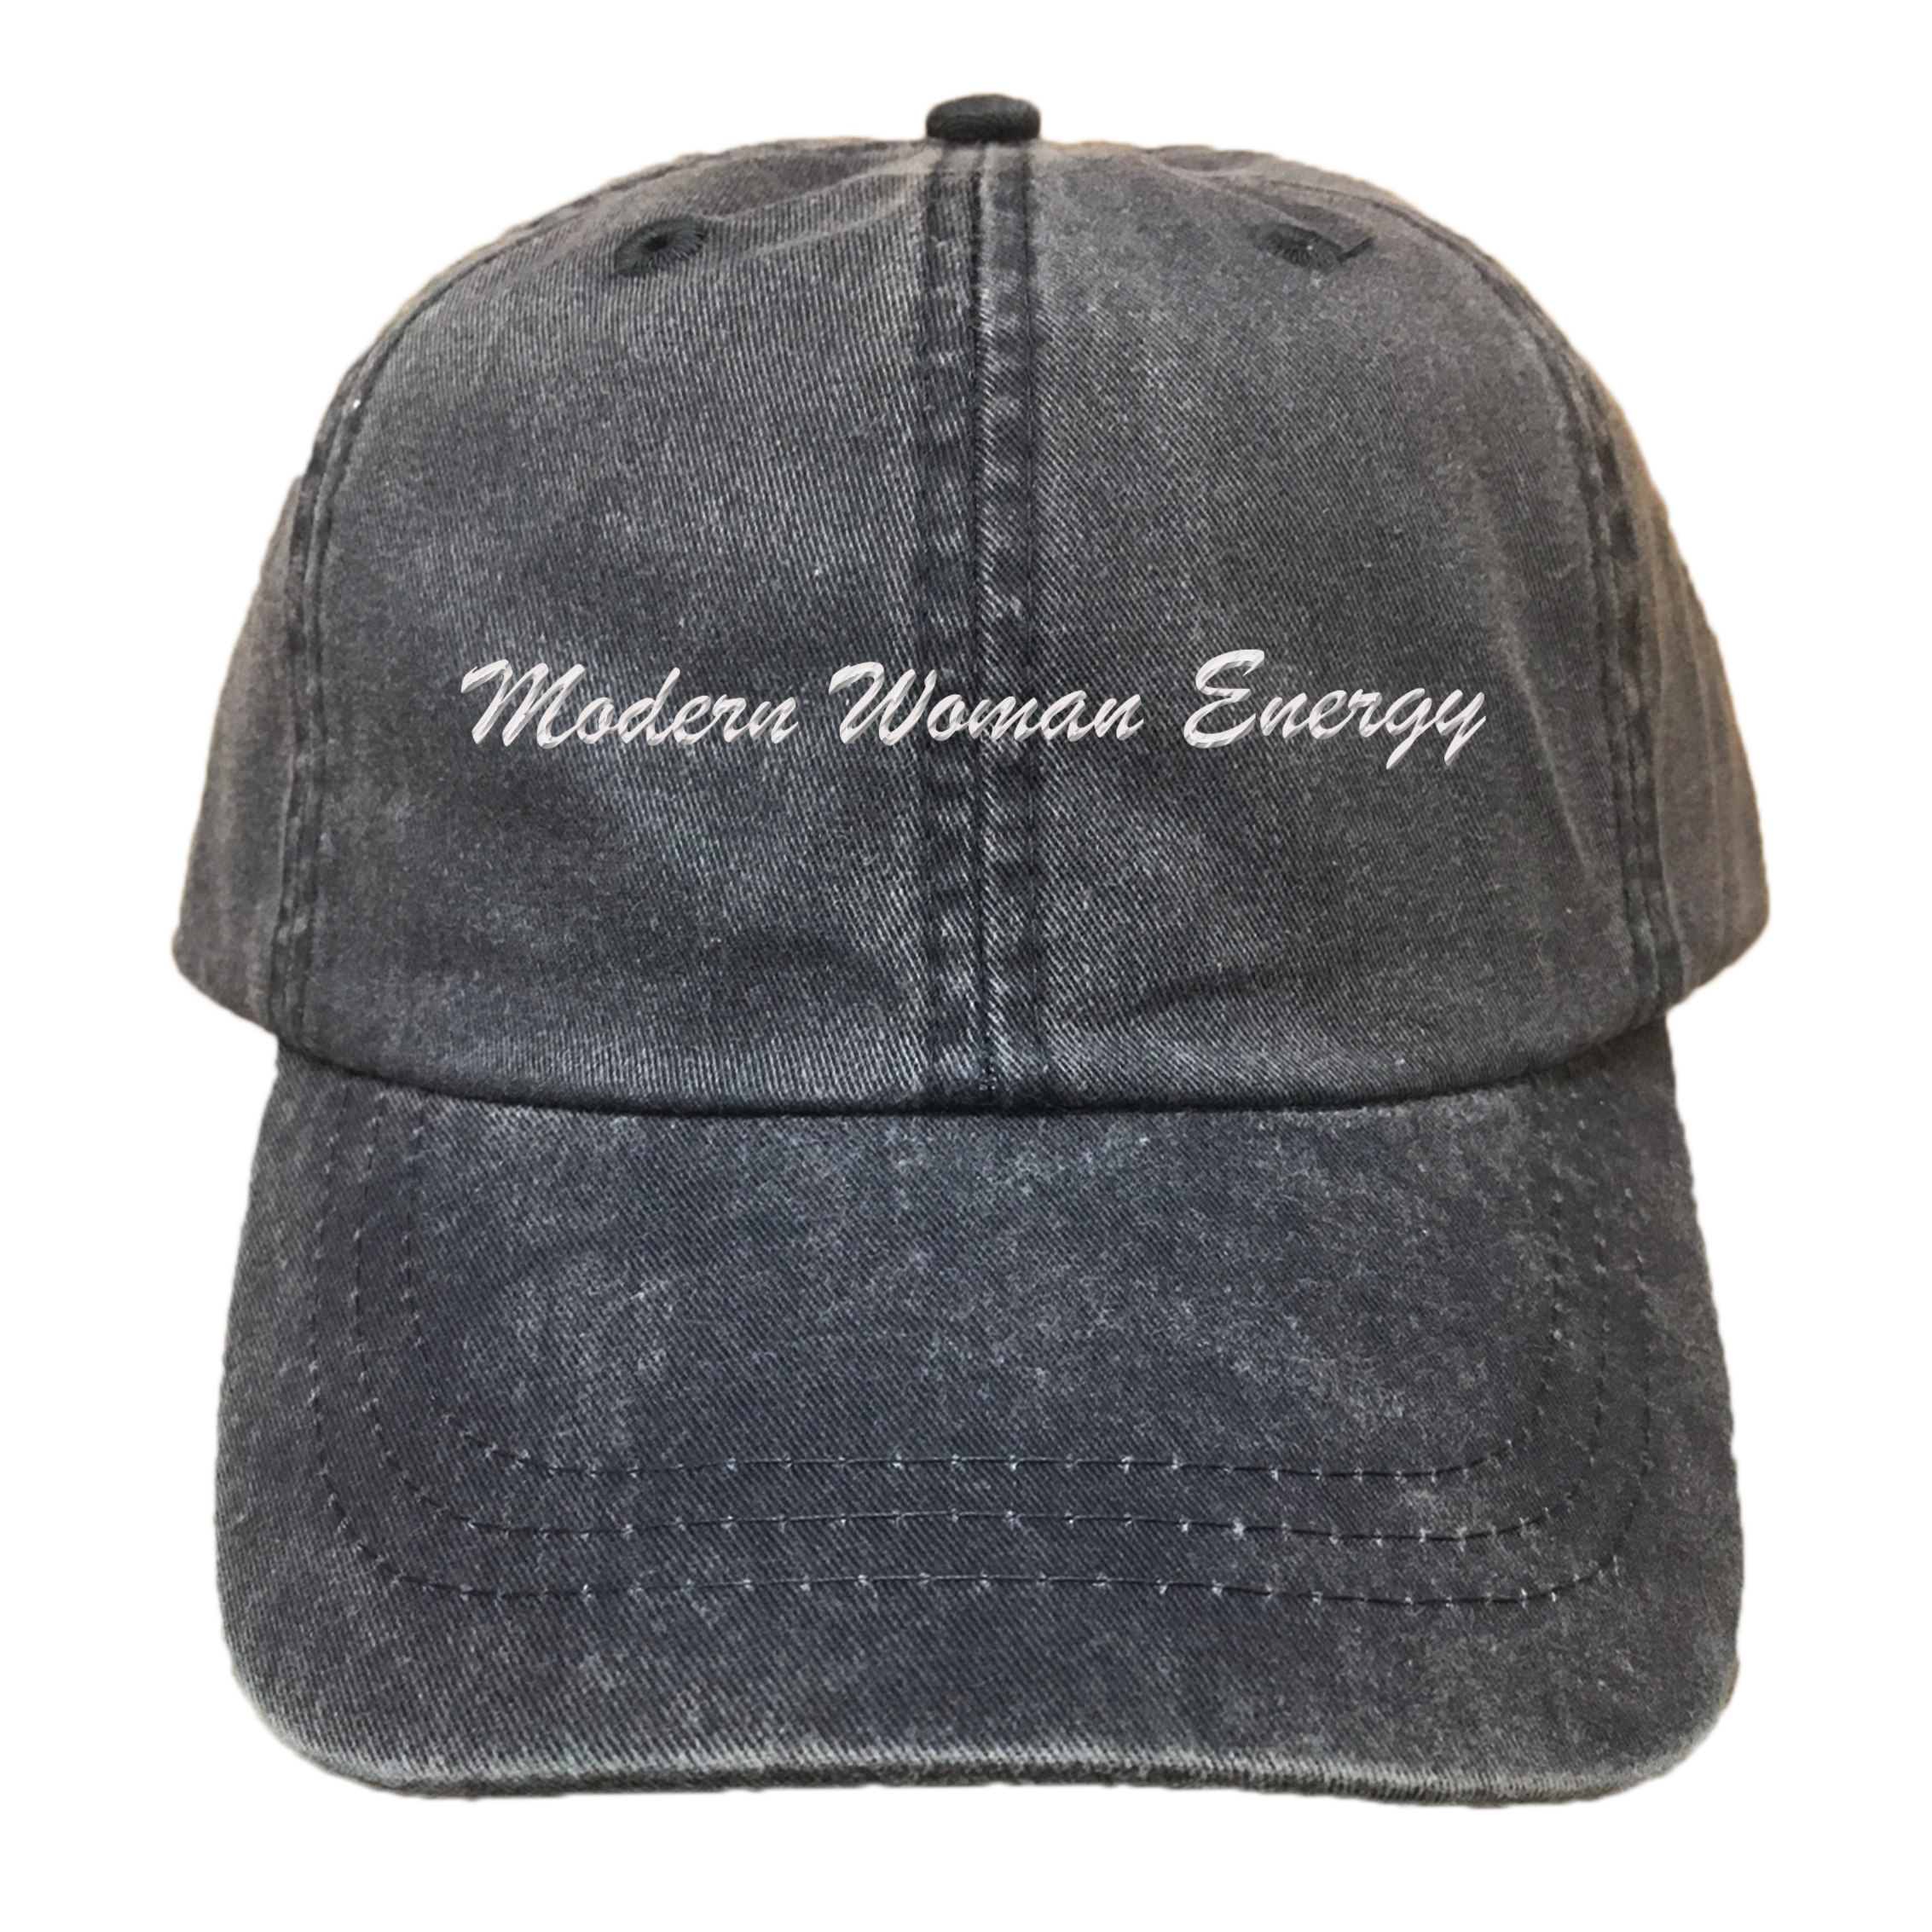 Modern Woman Energy EMBROIDERED Cotton Twill HAT